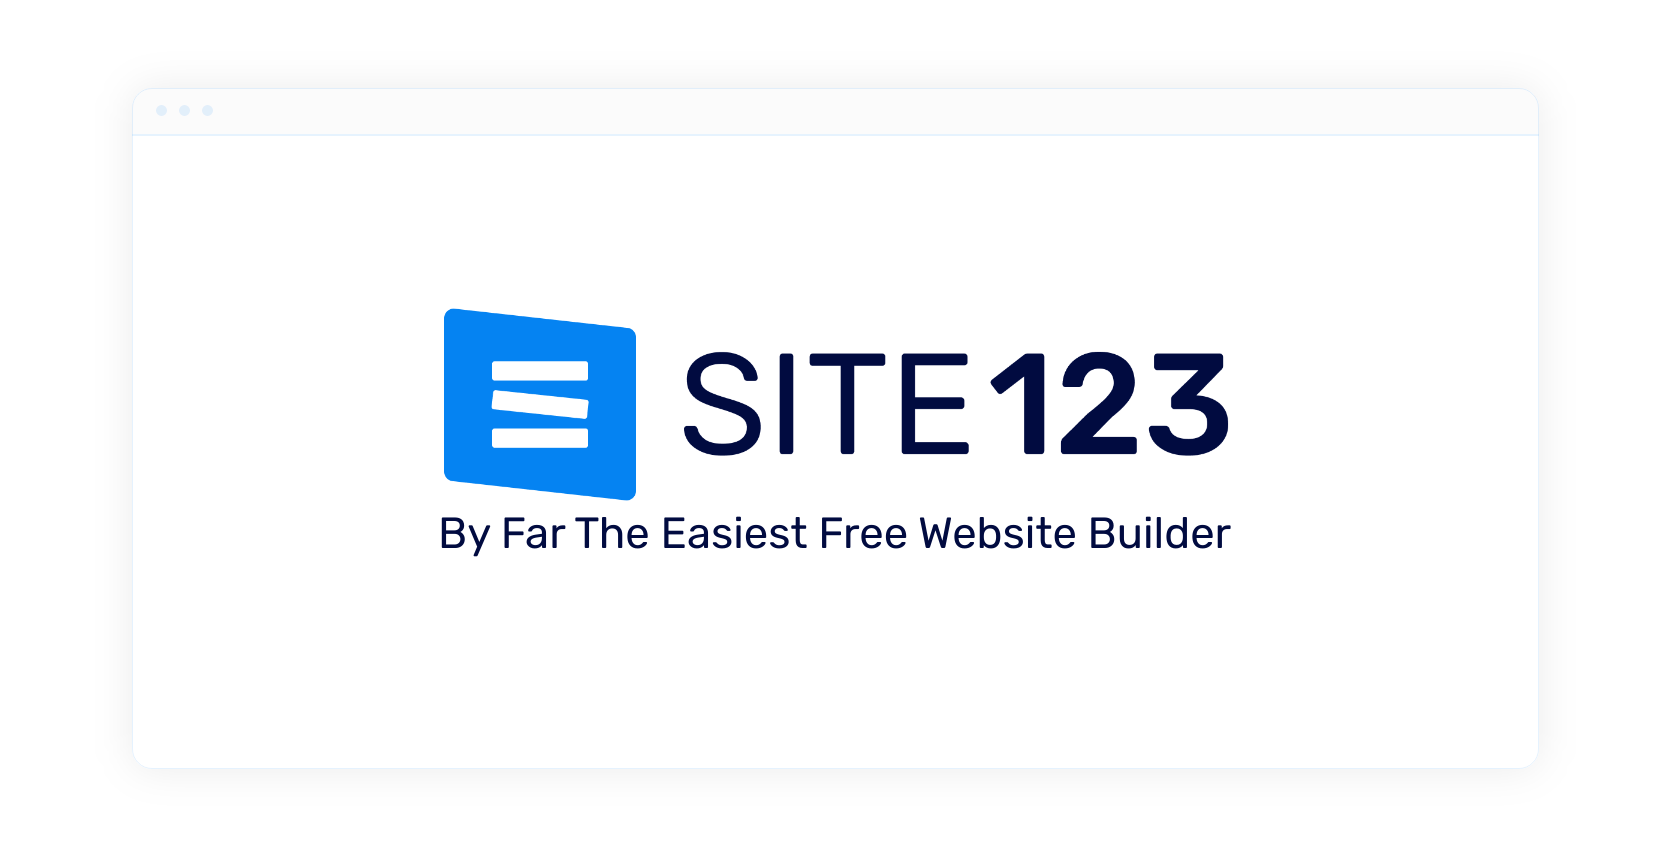 Review SITE123: Build Your Business Website In 3 Easy Steps - Appvizer